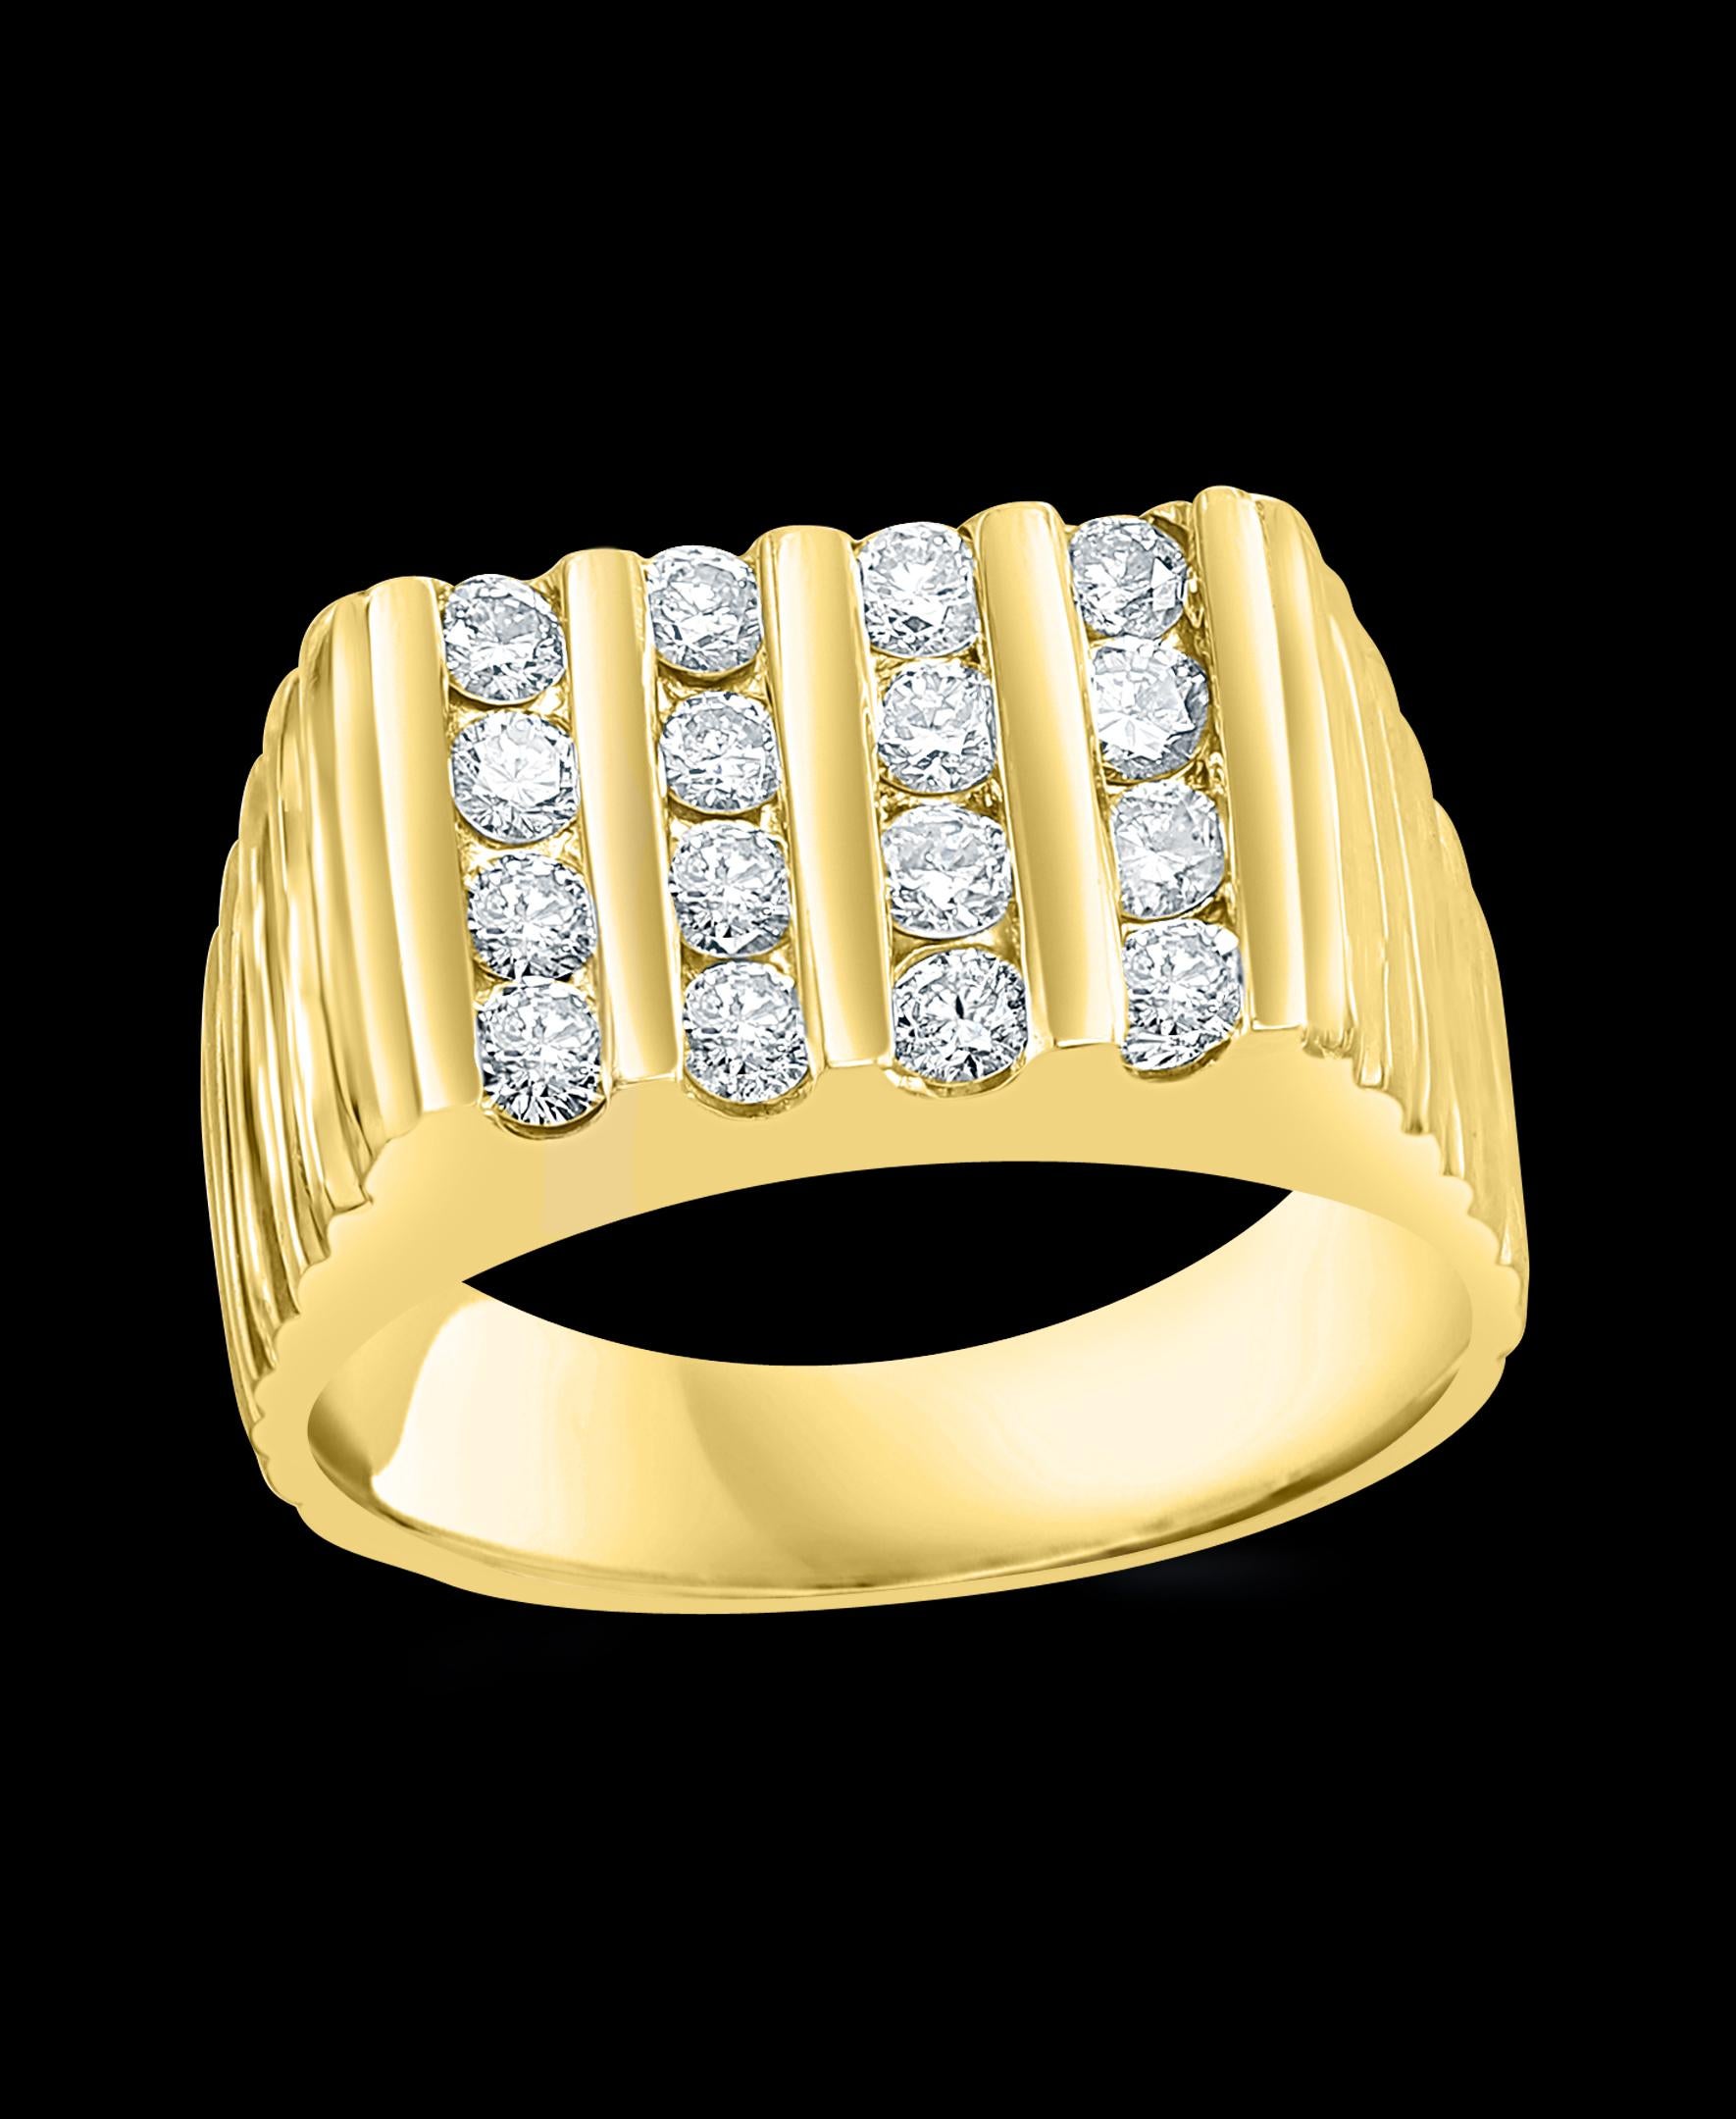 4 Row Unisex Diamond Band Engagement Ring in 14 Karat Yellow Gold Size 8
This is a open setting or channel setting ring from our affordable premium wedding collection.
16  round diamonds Eye Clean quality are set in four  row in 14  karat yellow